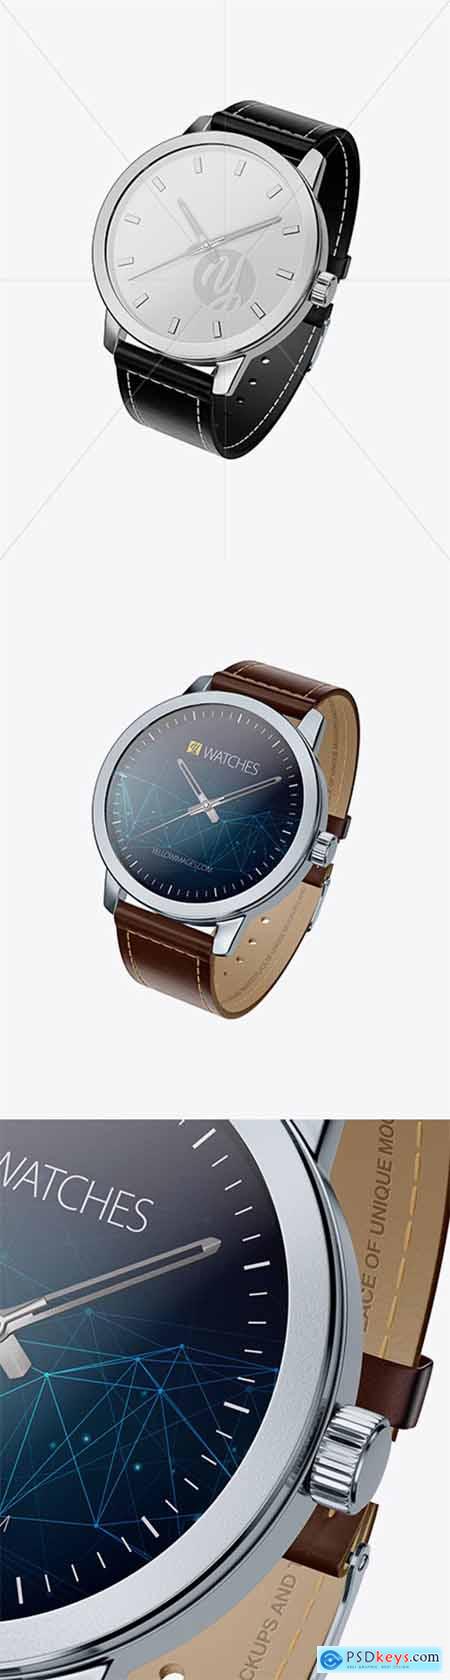 Watches Mockup - Half Side View 22109